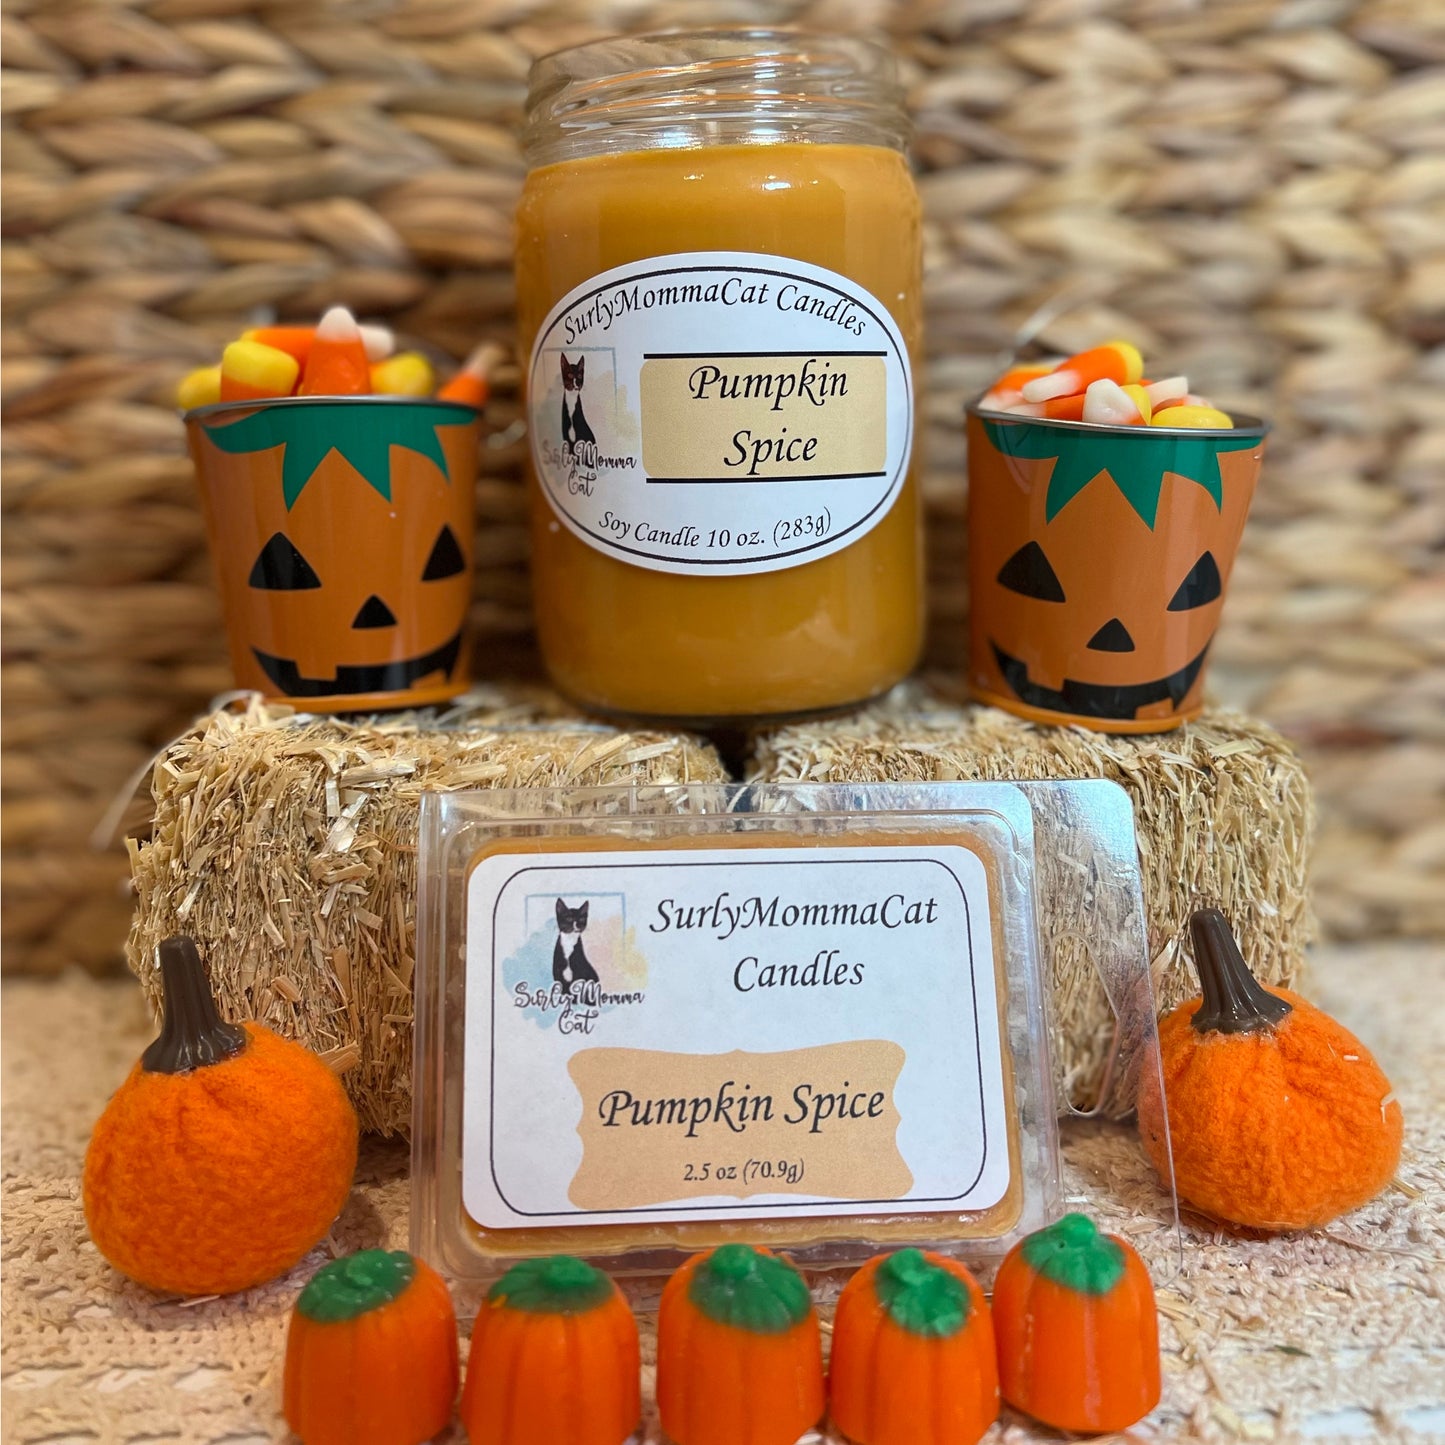 Orange Pumpkin Spice soy glass jar candle, with wax melt and two small pumpkin pails sitting on tiny decorative hay bales with candy corn pumpkins for decoration.